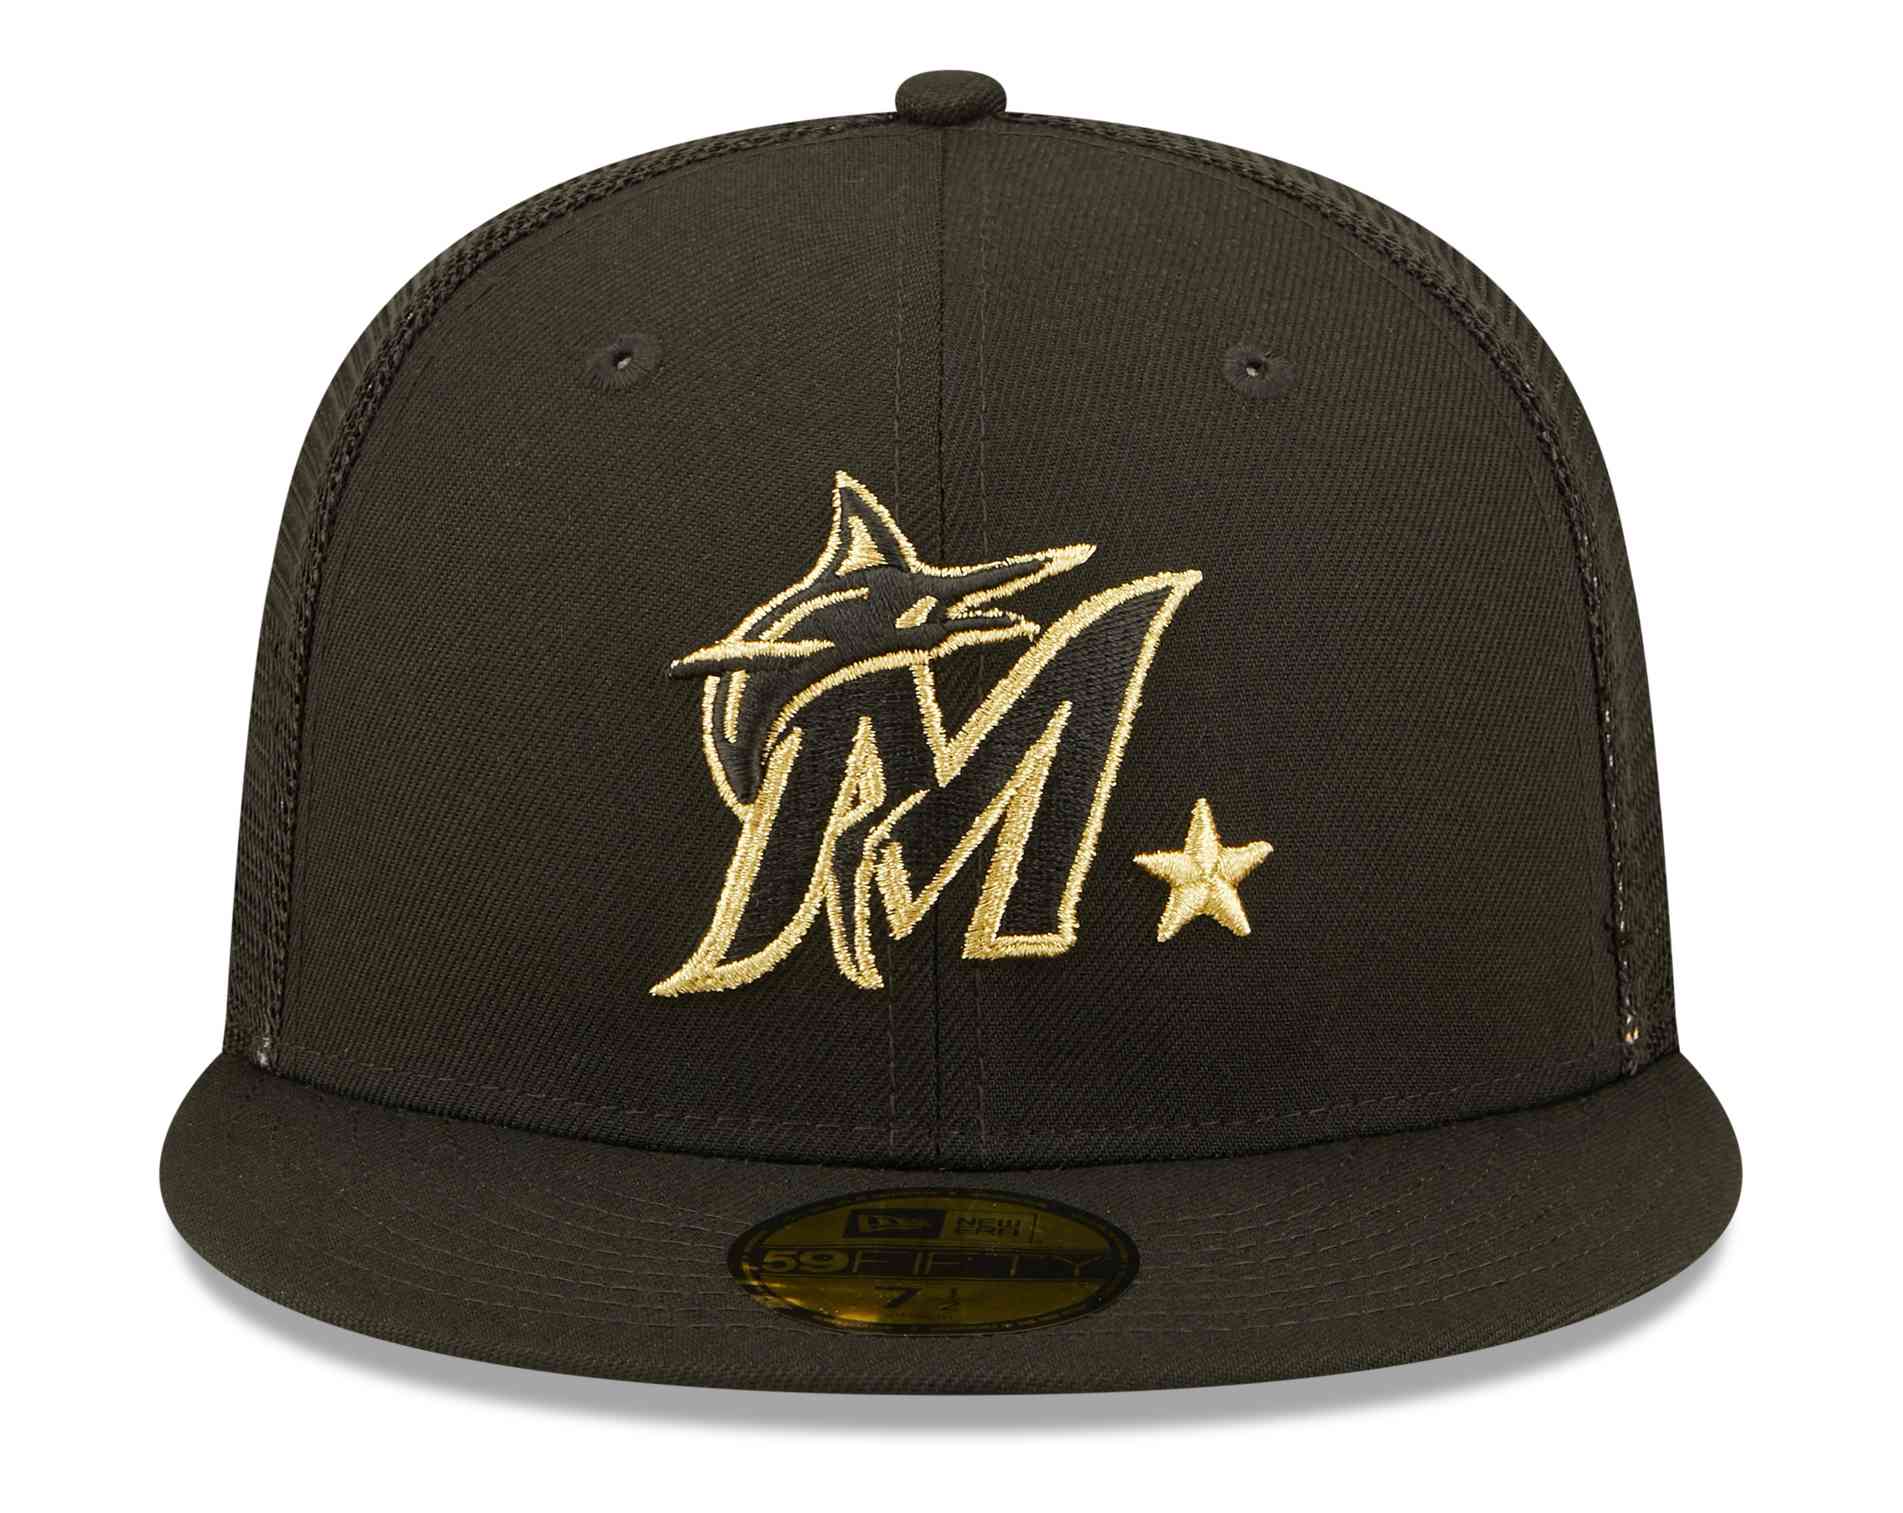 New Era - MLB Miami Marlins All Star Game Patch 59Fifty Fitted Cap